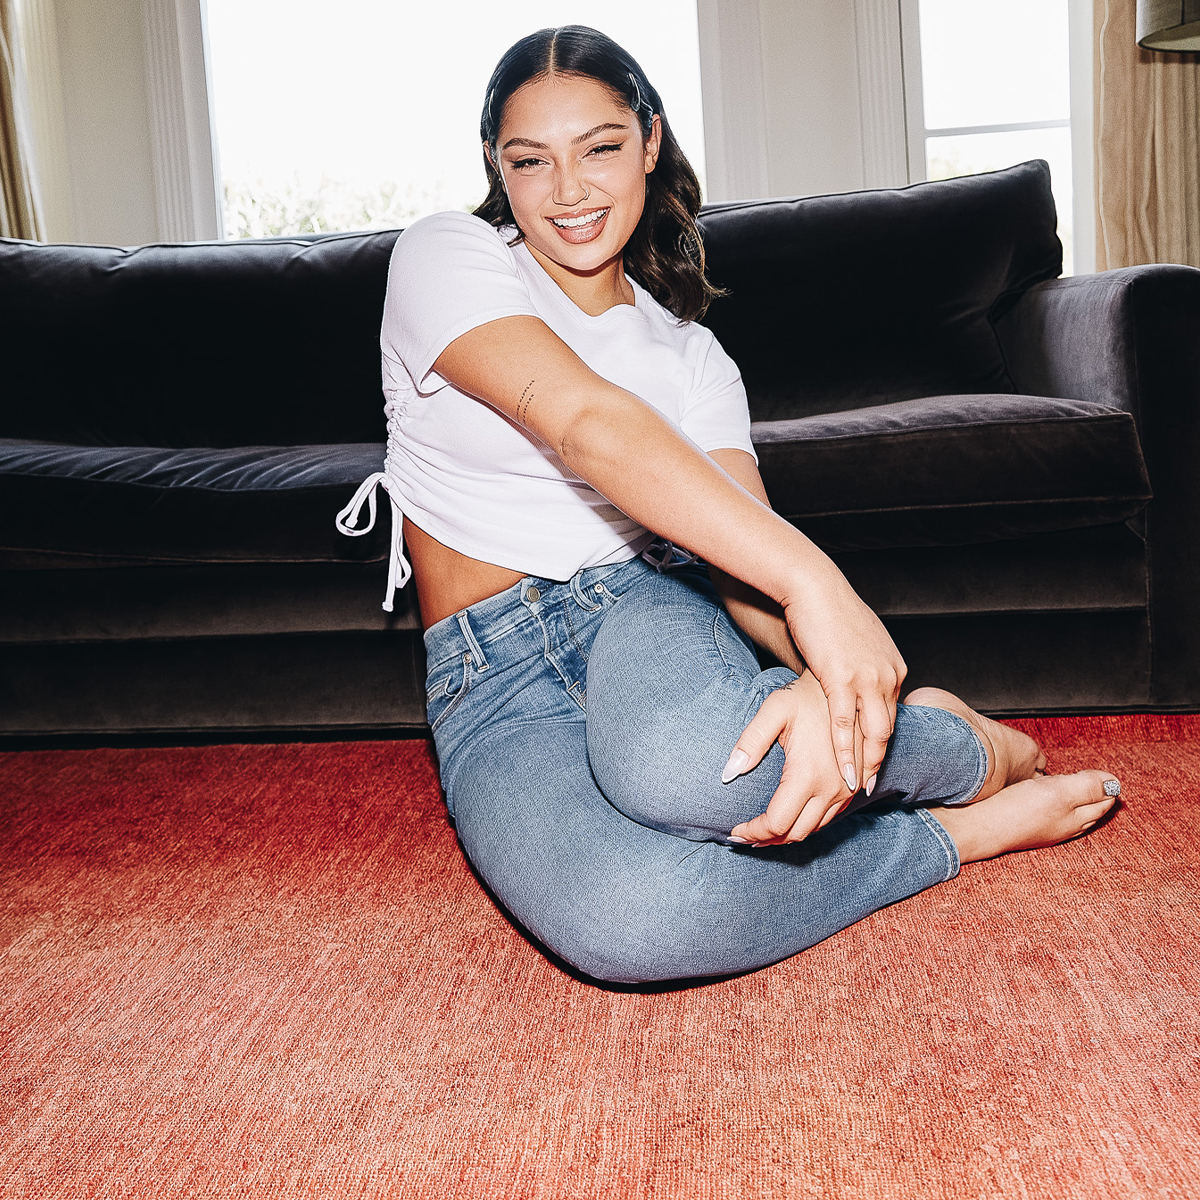 Avani Gregg on if Those Good American Jeans Really Stretch 4 Sizes